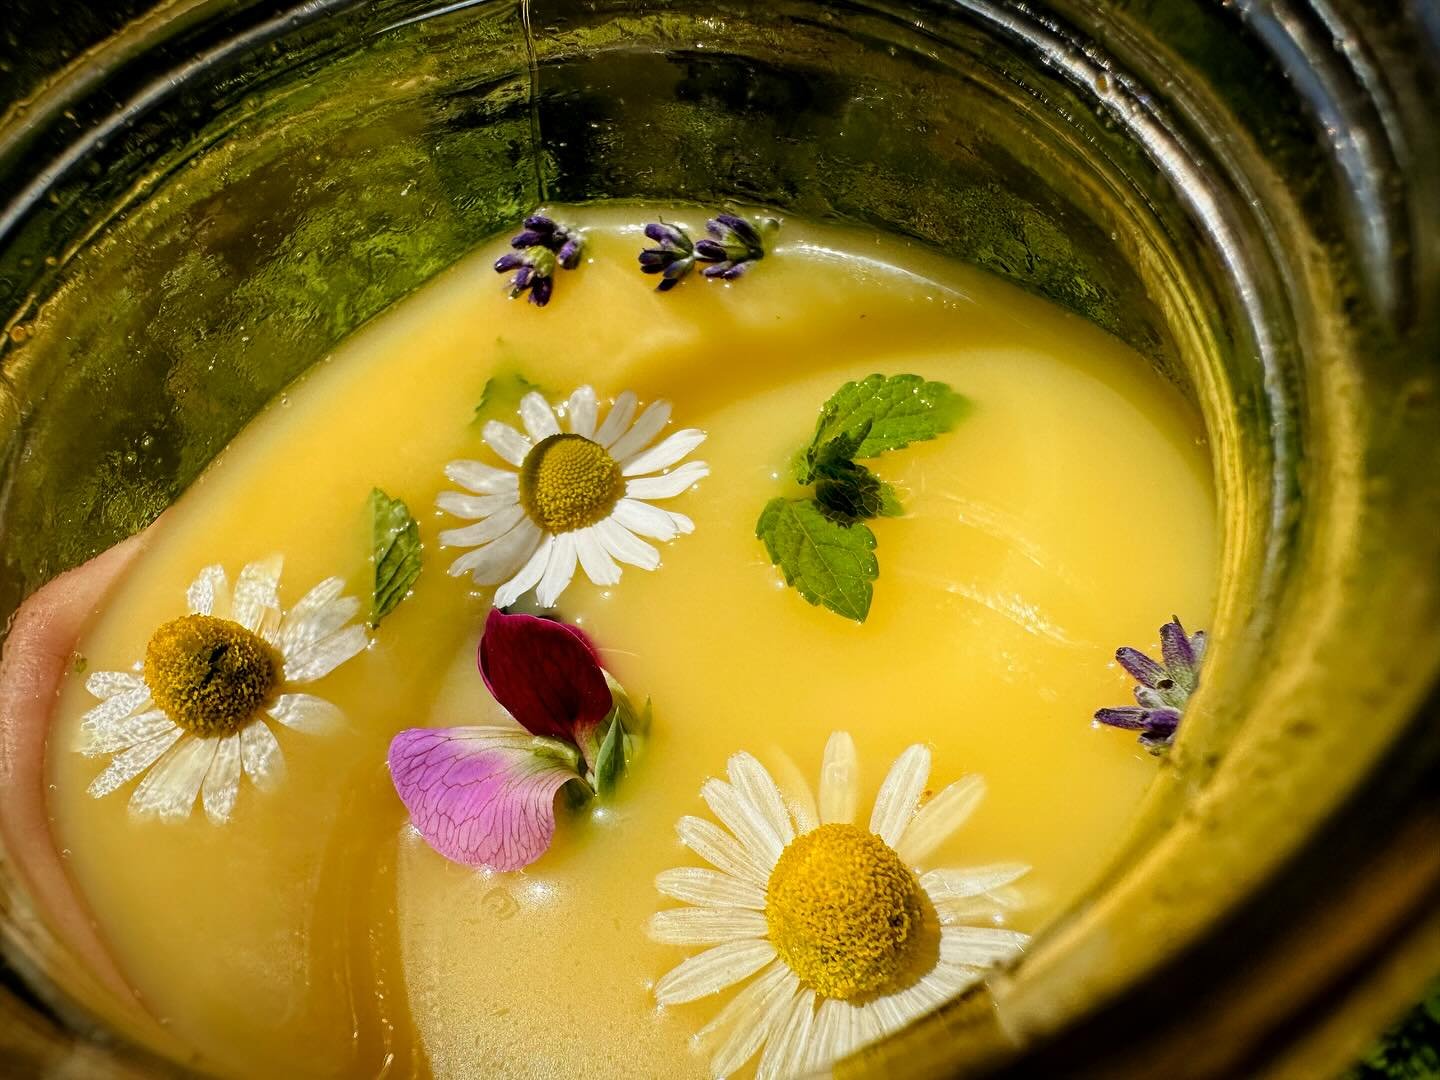 🌞✨GARDEN and CHILLed GOLDEN MILK🌸🧑🏻&zwj;🌾 

Pop your golden milk in the freezer for a few minutes and/or add some ice cubes. Then, when you get to the garden, add whatever delightful herbal blooms catch your eye for a cup of pretty sunshiny gard